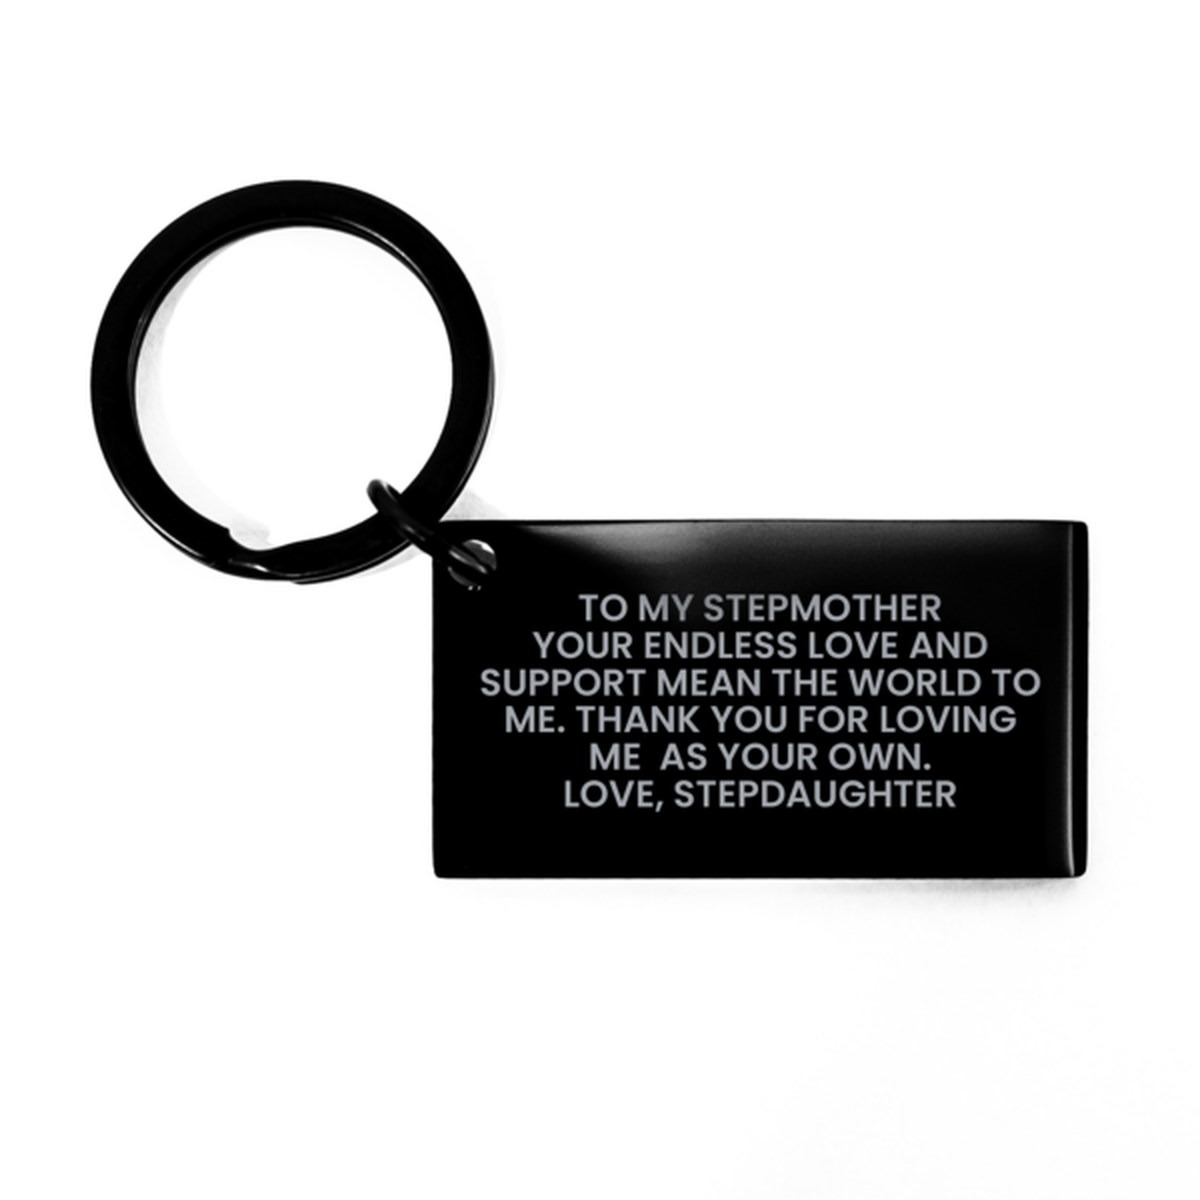 To My Stepmother   Black Keychain, Your Endless Love, Valentines Gifts For Stepmother From Stepdaughter, Birthday Gifts For Women